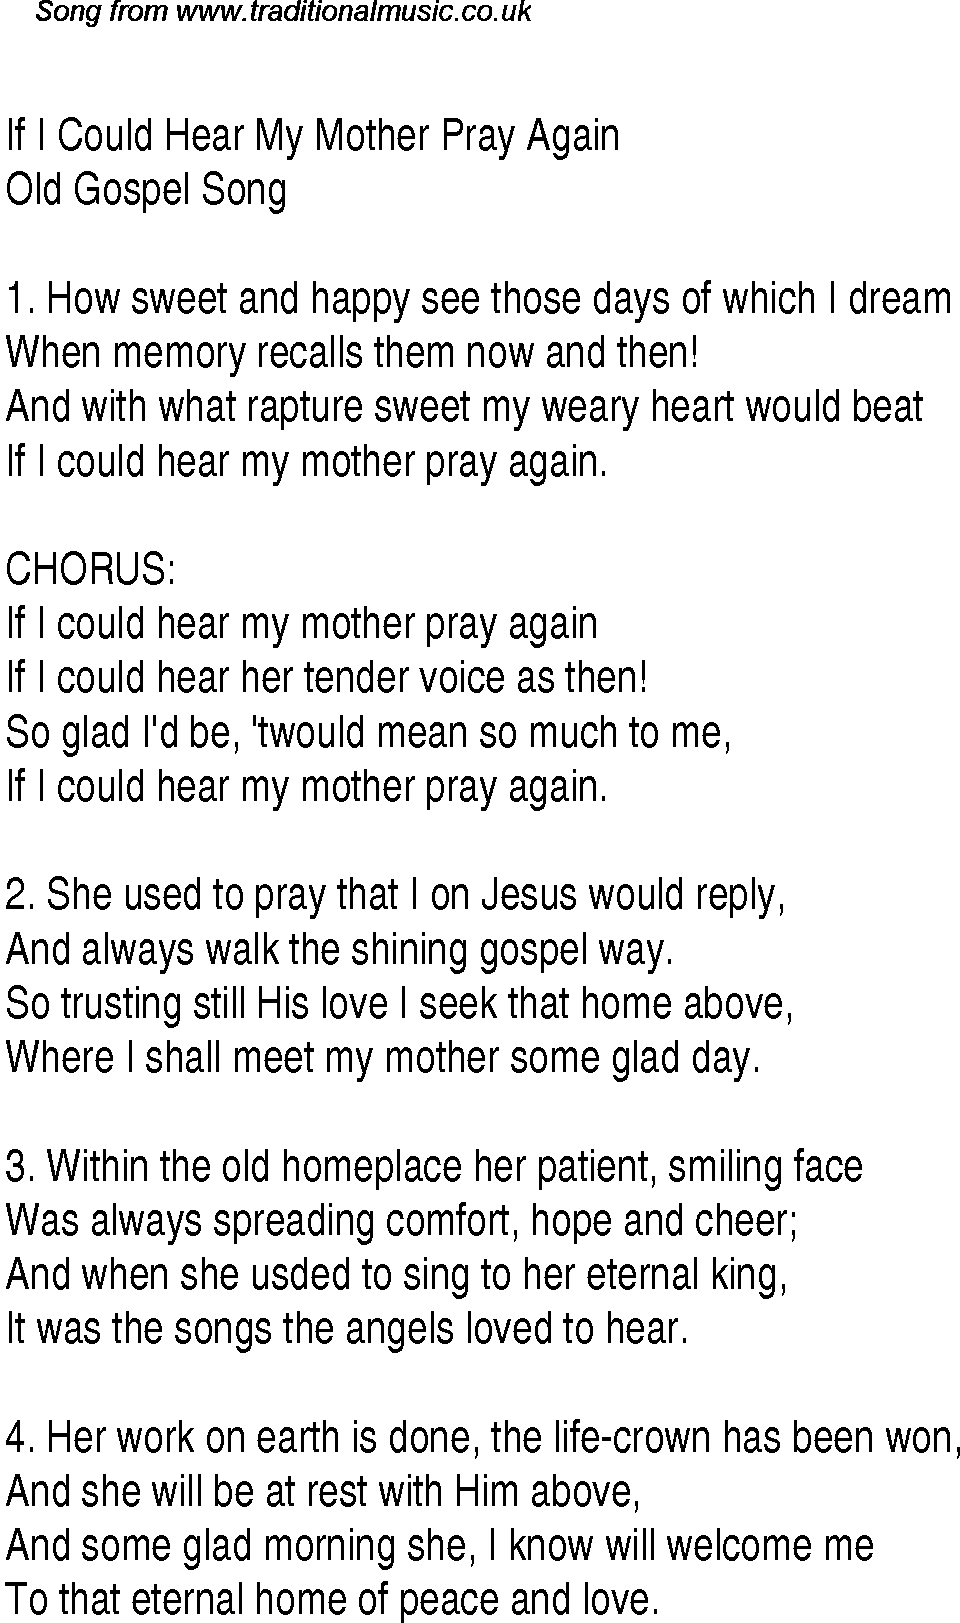 Gospel Song: if-i-could-hear-my-mother-pray-again, lyrics and chords.